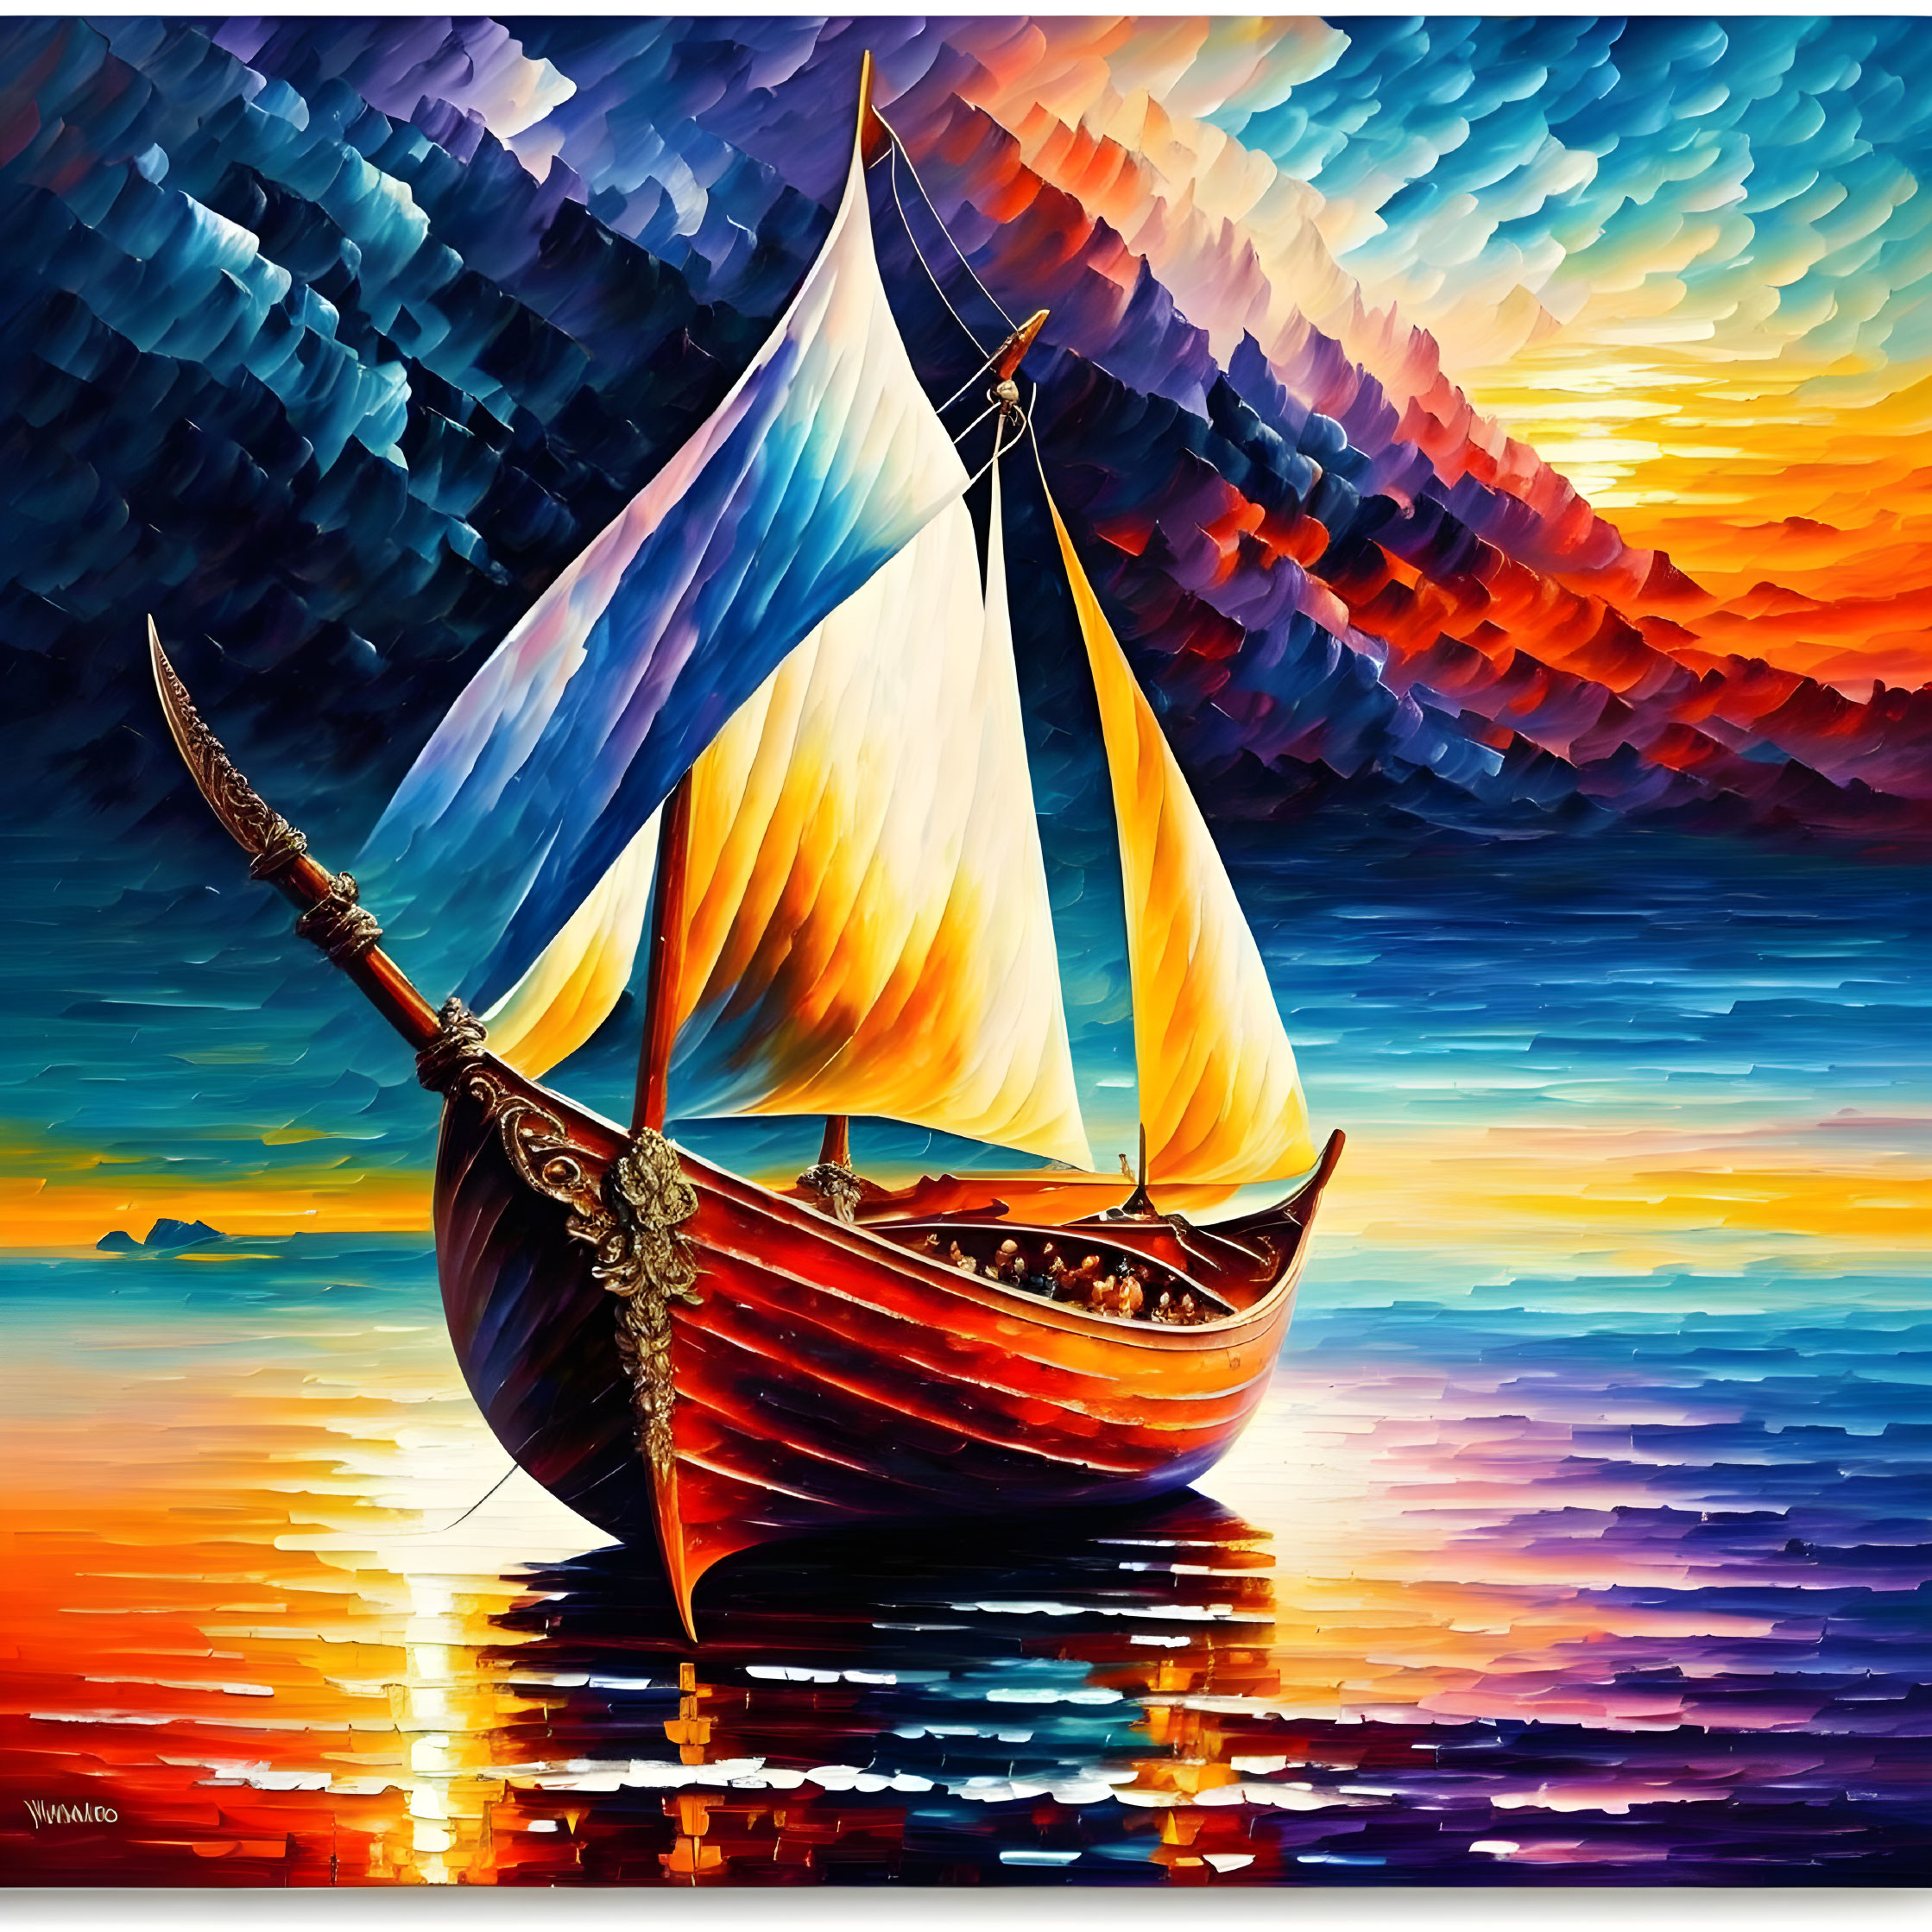 Colorful Sailboat Painting with Yellow and Blue Sails on Reflective Water